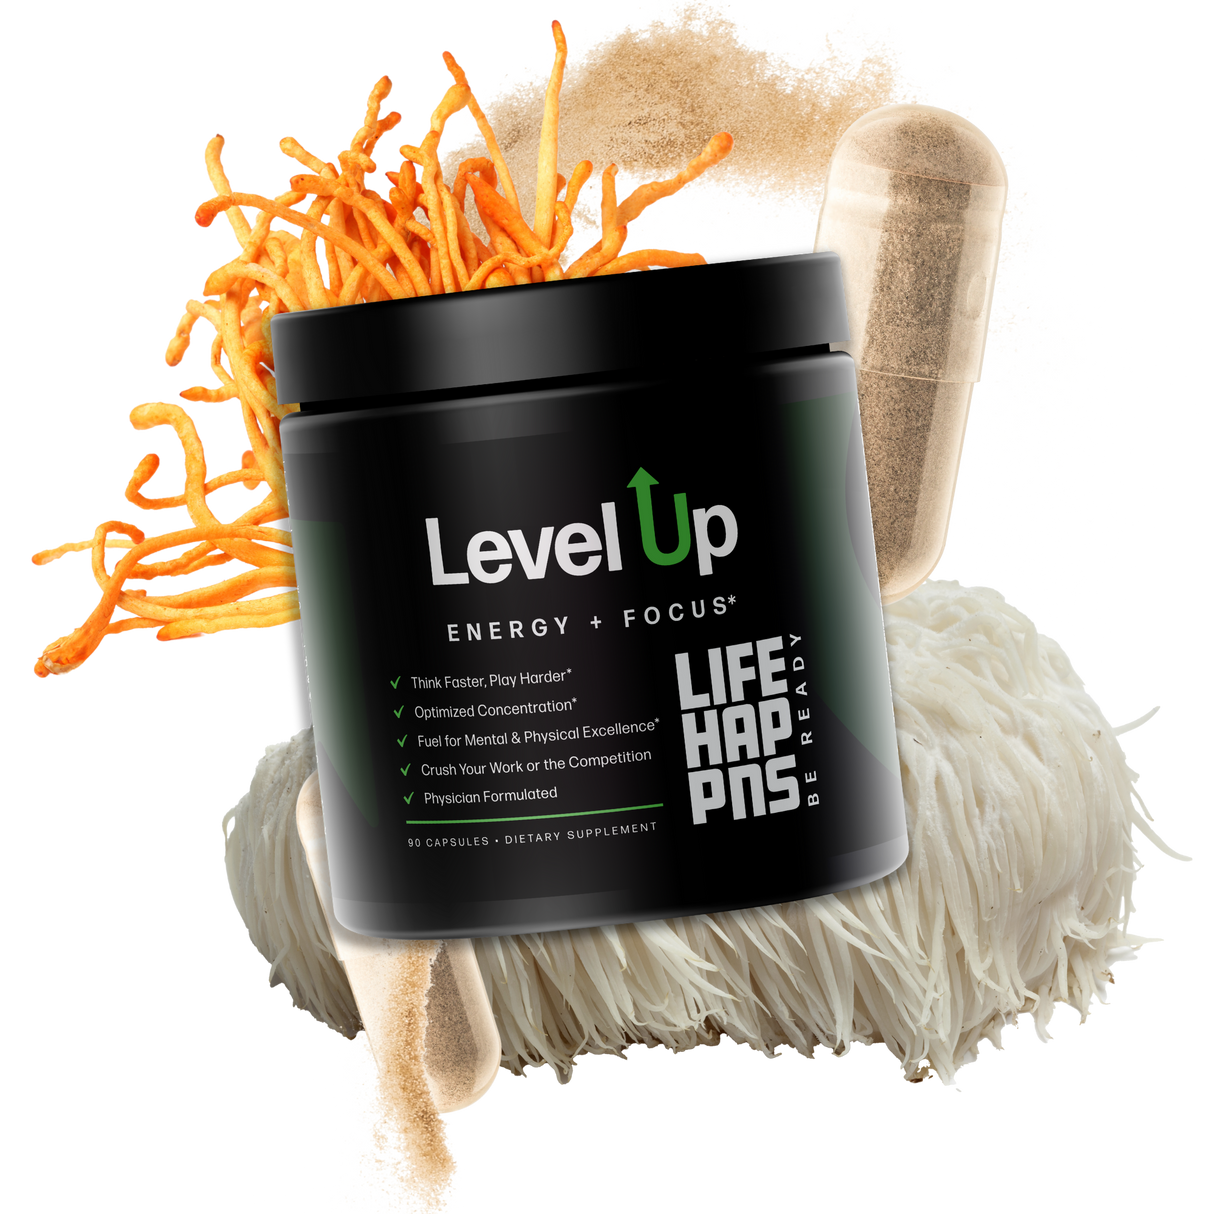 Life Happns Level Up Energy and Focus Supplement with Lion’s Mane Mushroom, Cordyceps, and Capsule